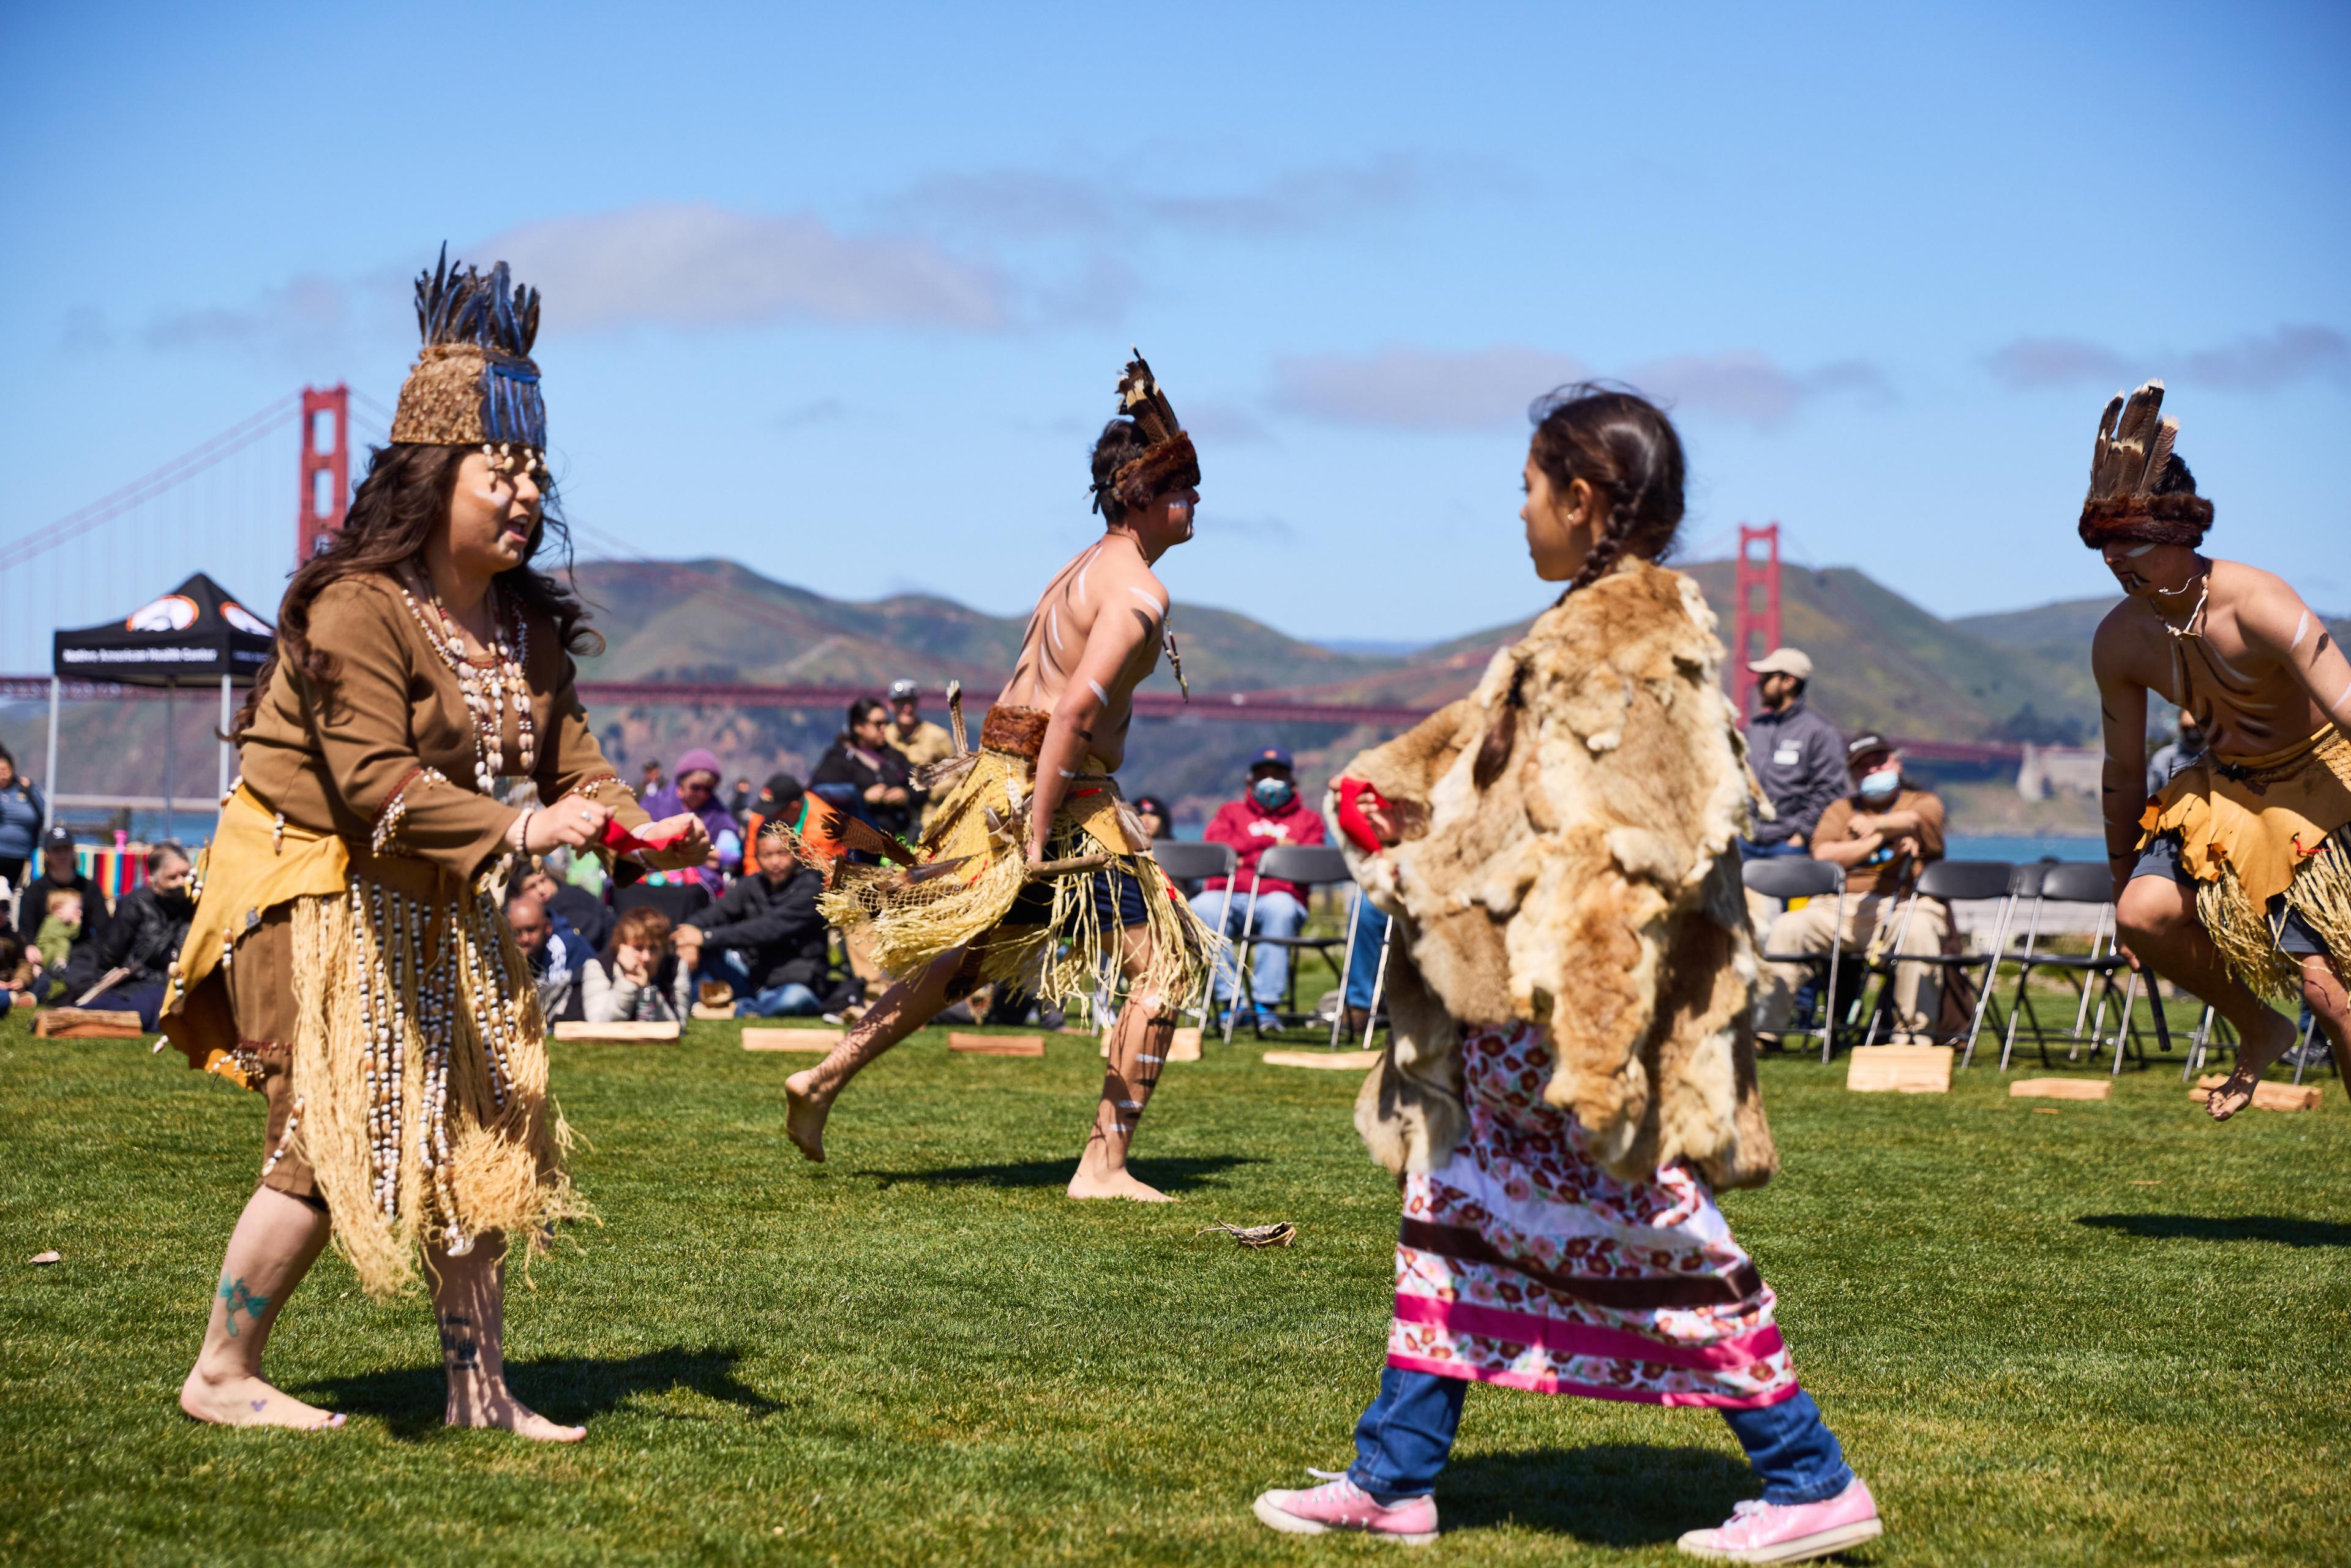 Group of individuals dressed in indigenous attire dancing with the Golden Gate Bridge in the backgrounf=d.